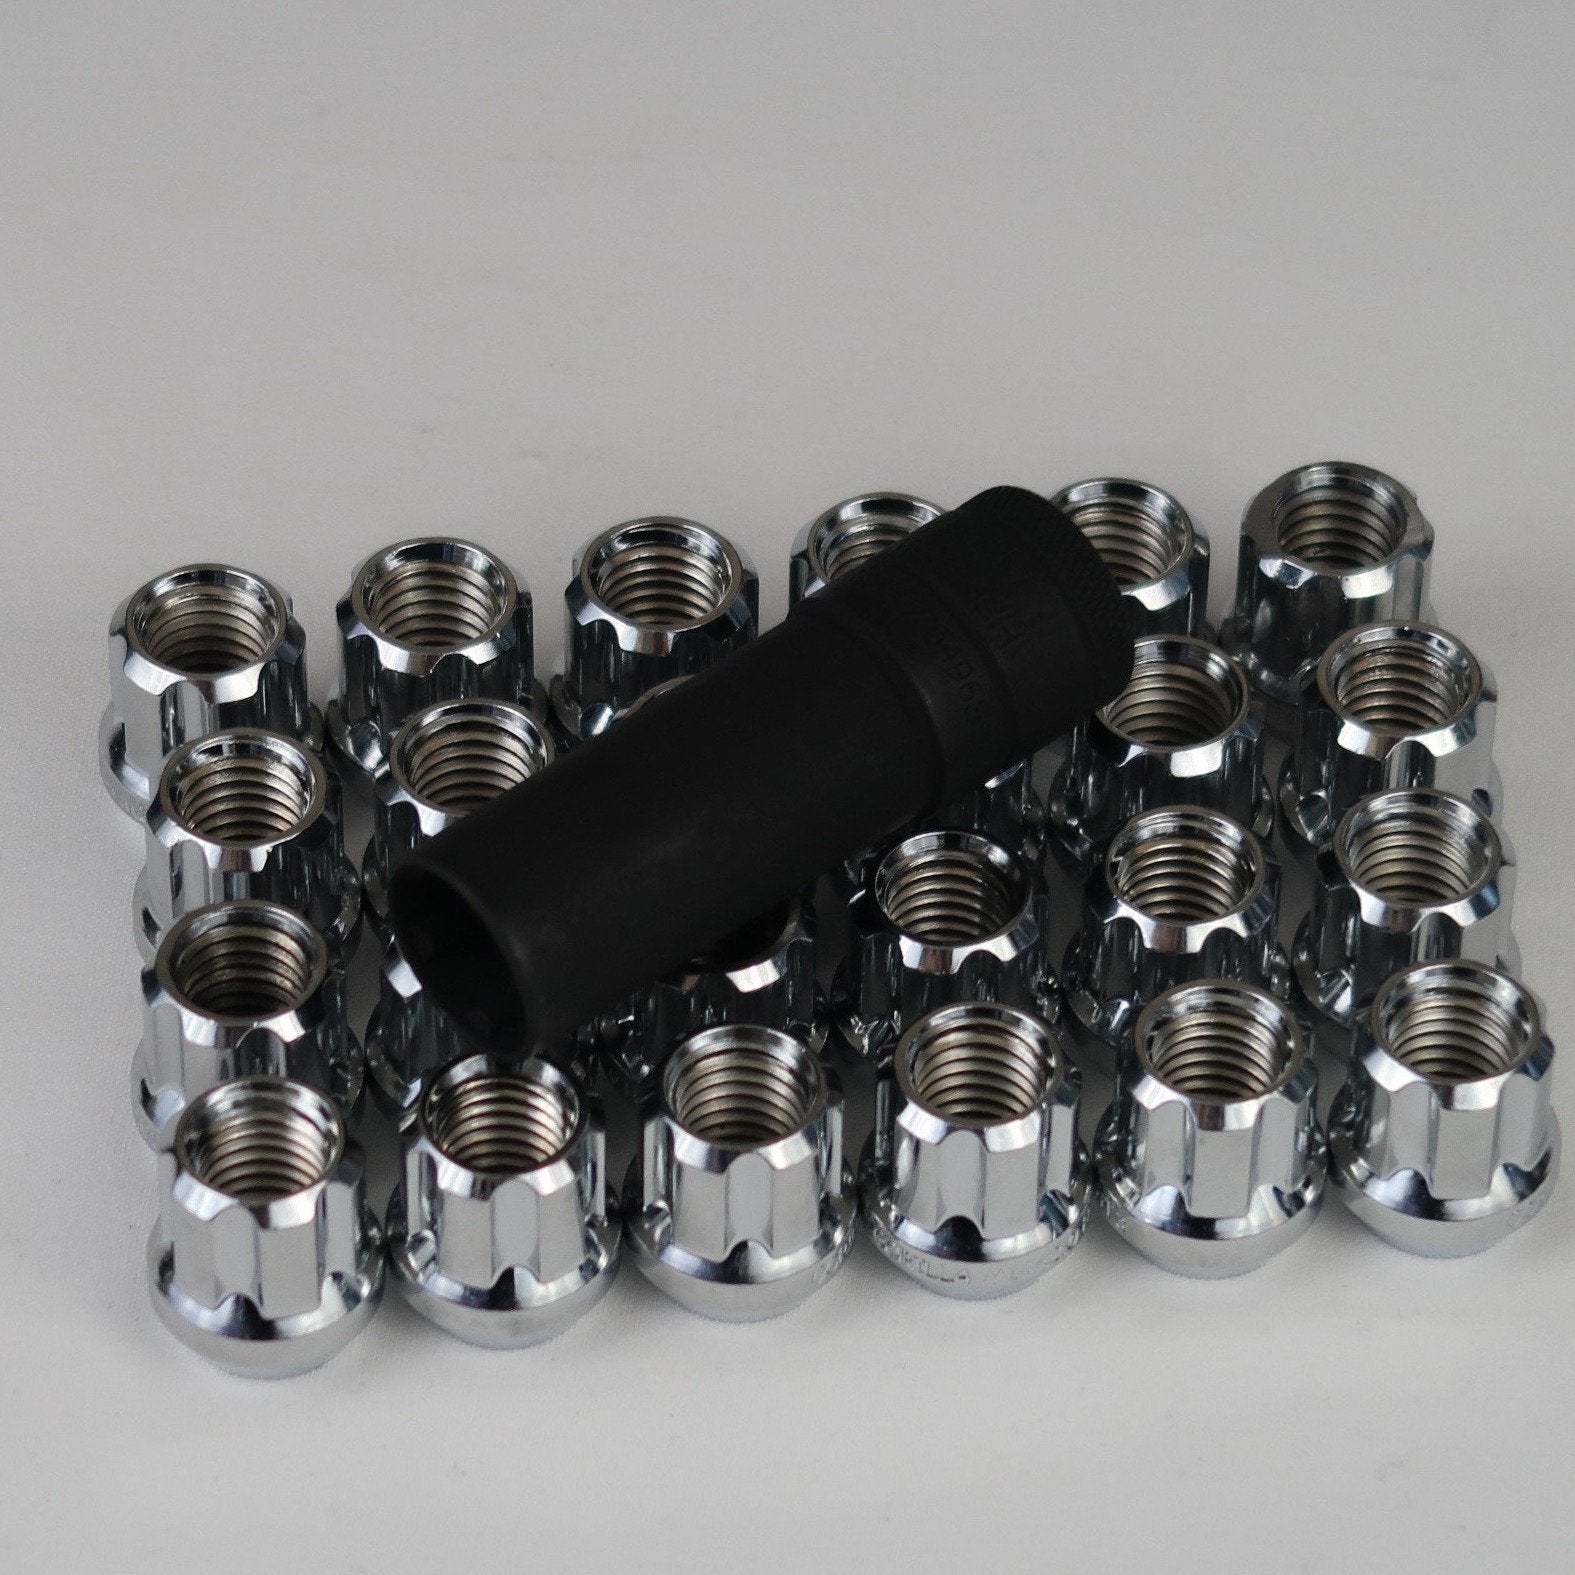 Lugnuts set- 5x 20 | 6x 24 | 8x 32 Black or Chrome (Open) - Tires and Engine Performance